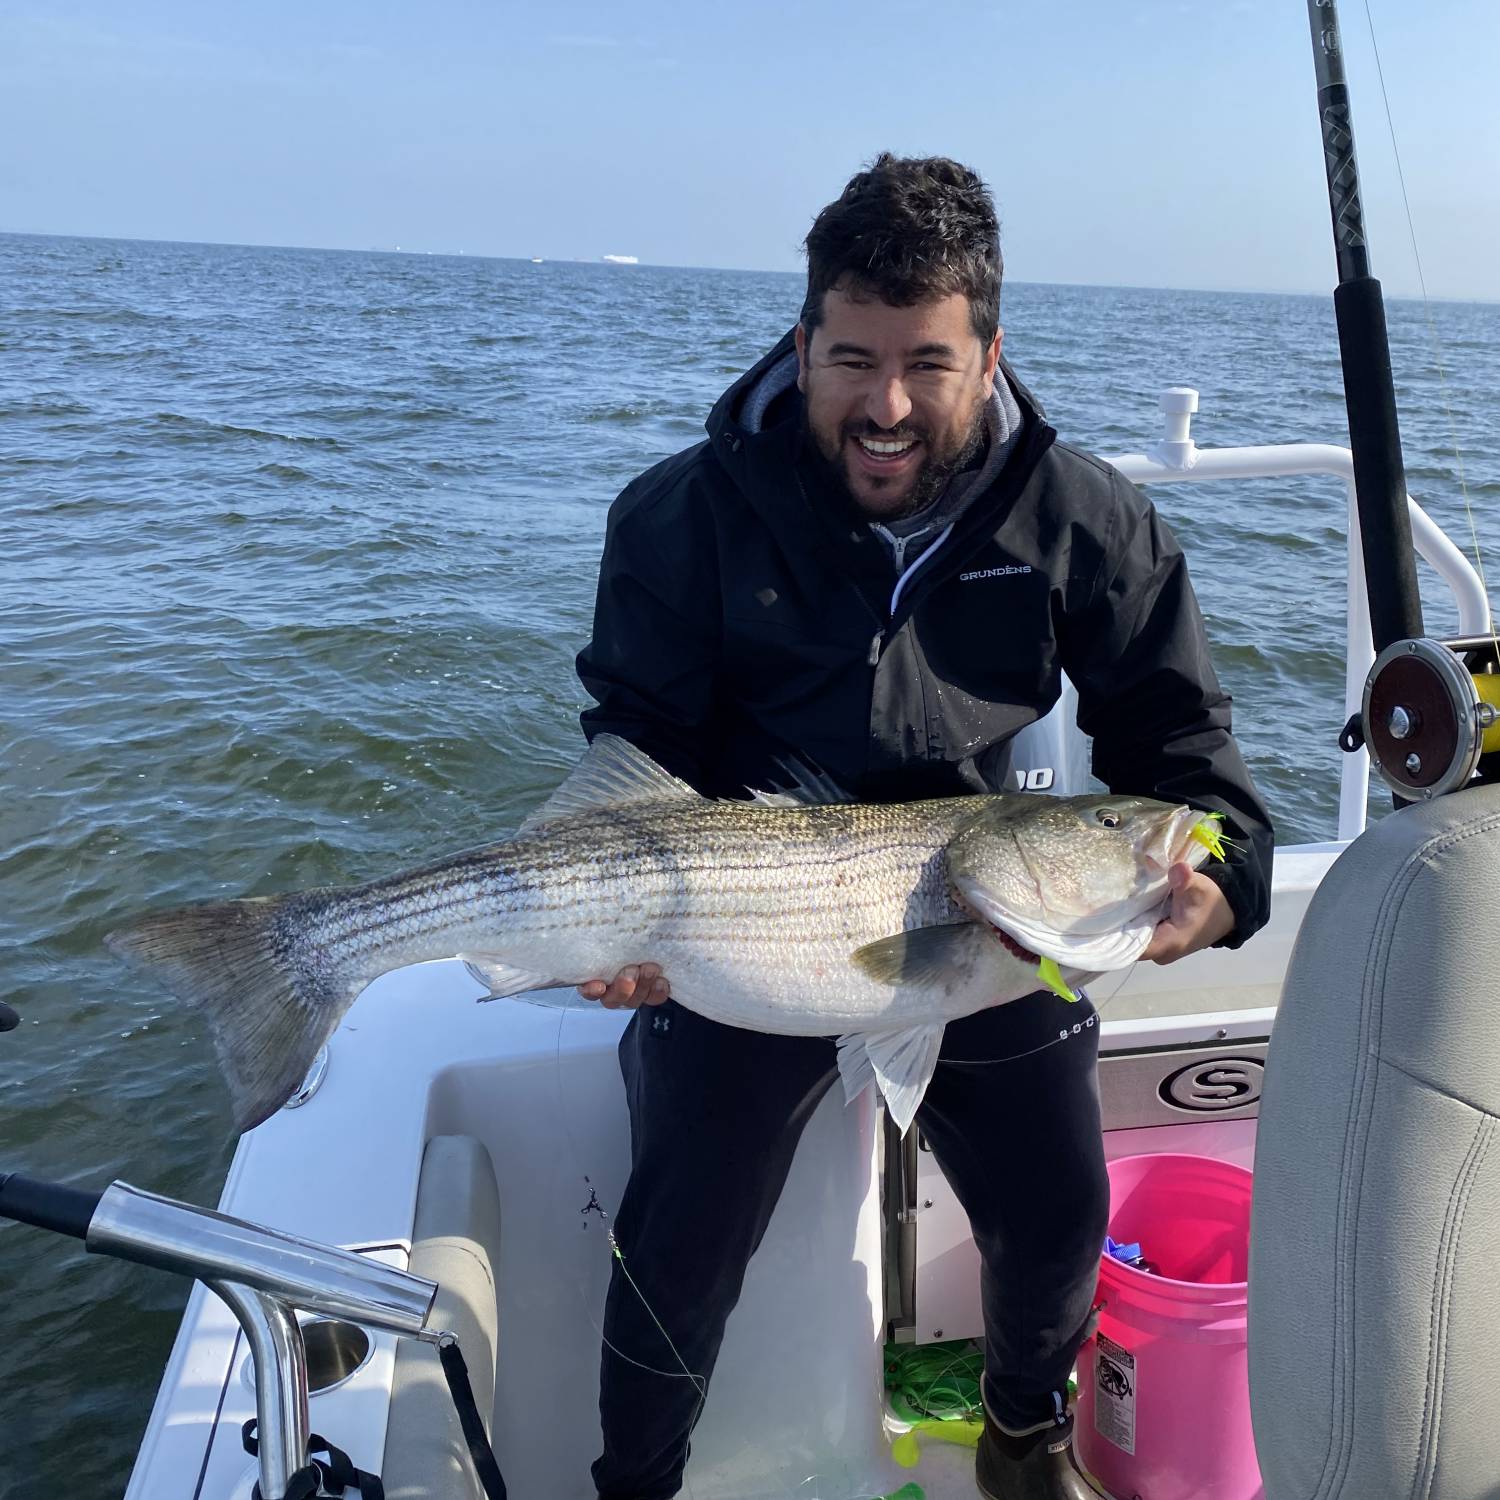 After one year of research and practice, we finally caught a trophy rockfish. The rockfish, also known as the striped...